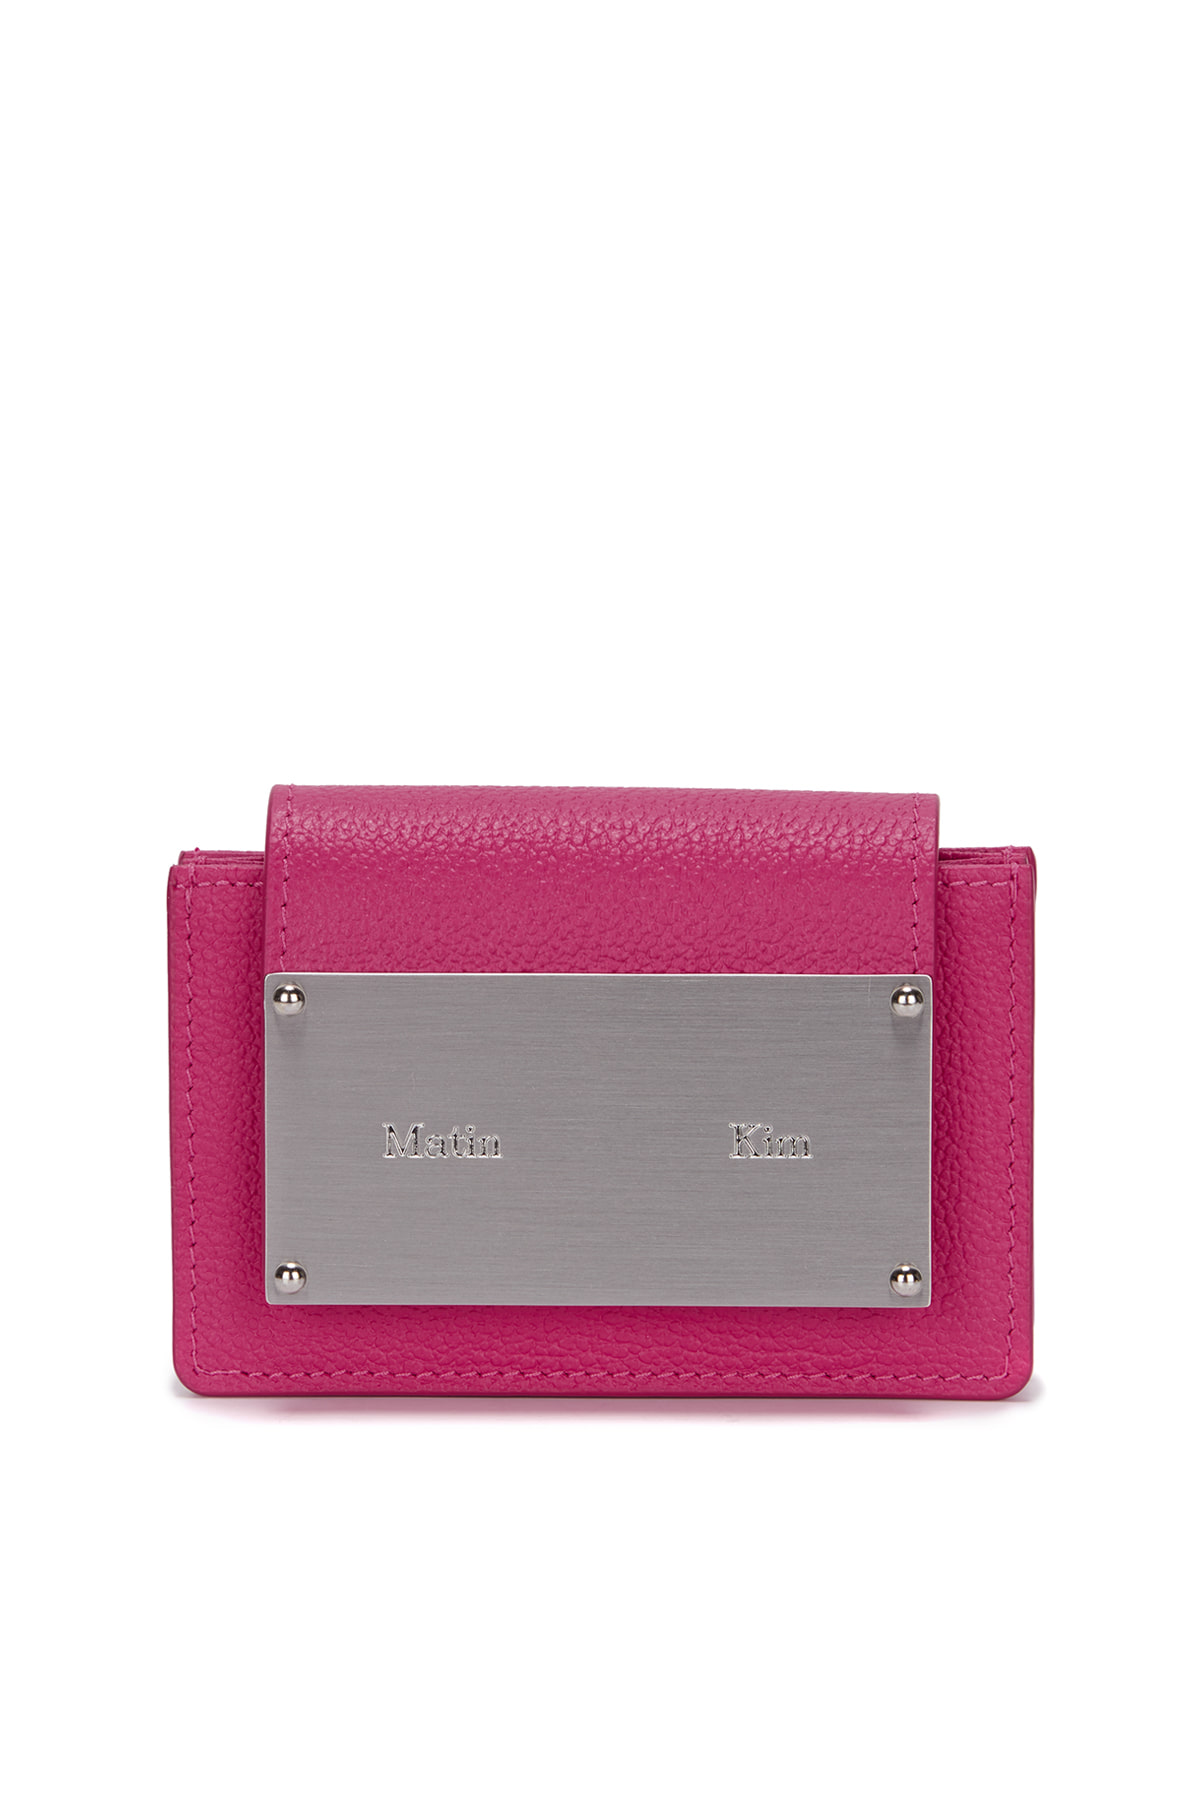 ACCORDION WALLET IN HOT PINK - MATINKIM